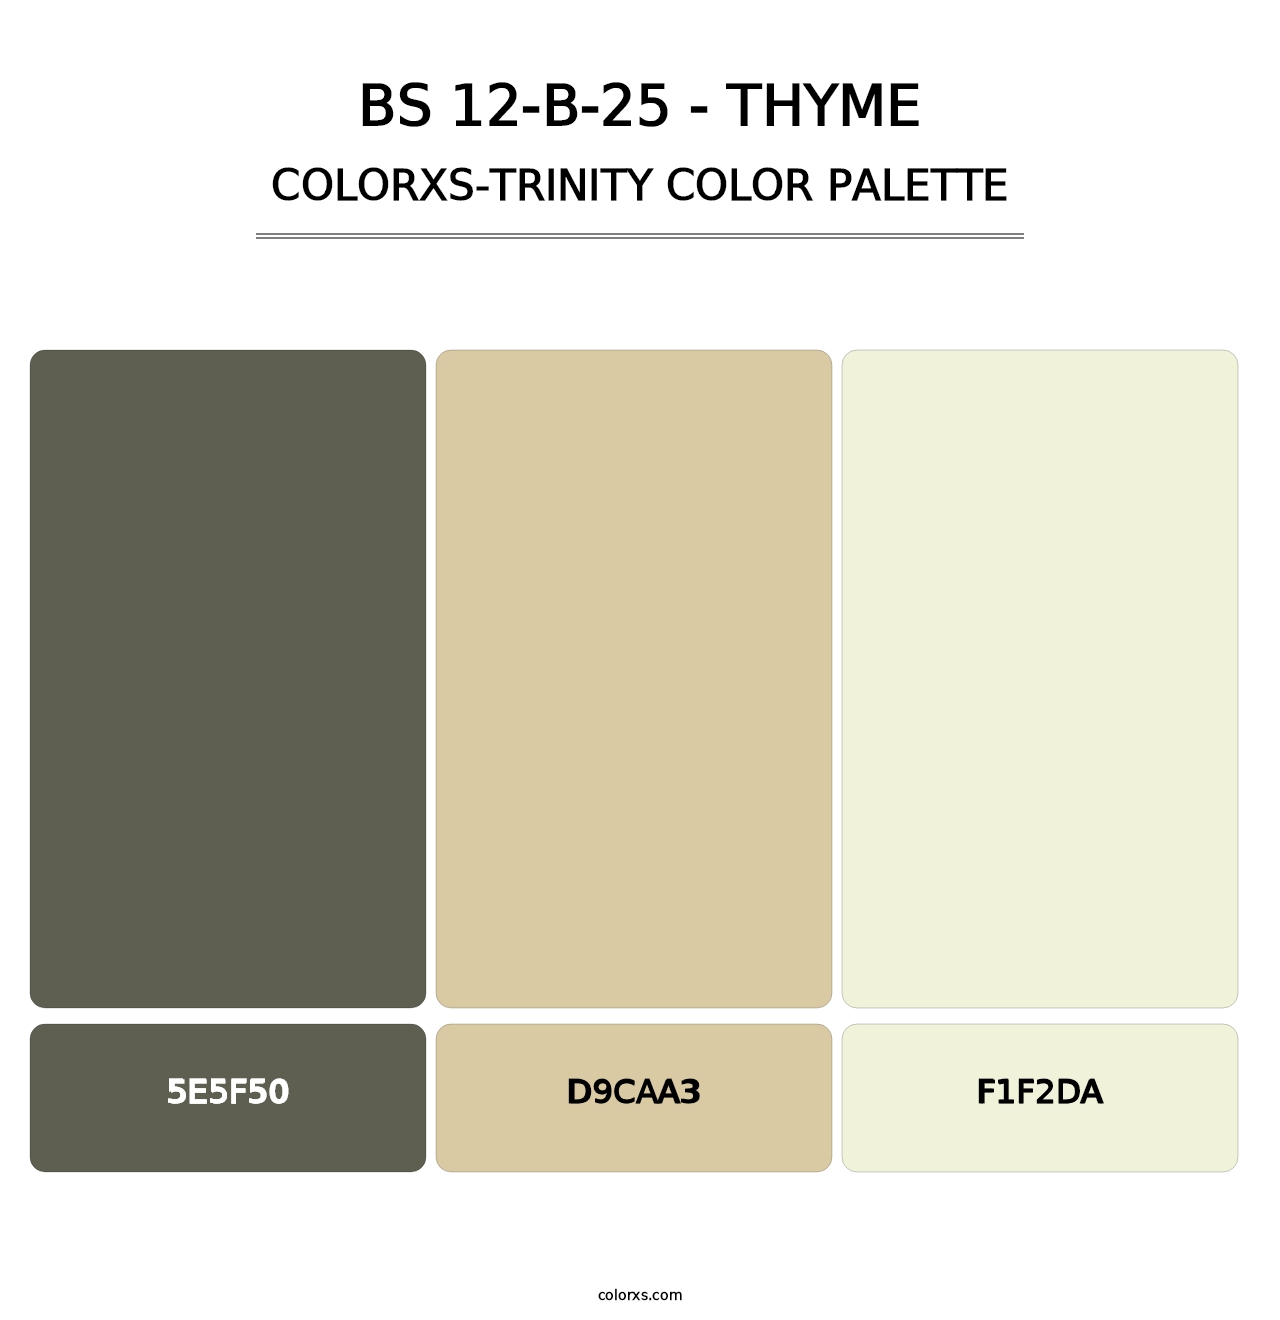 BS 12-B-25 - Thyme - Colorxs Trinity Palette